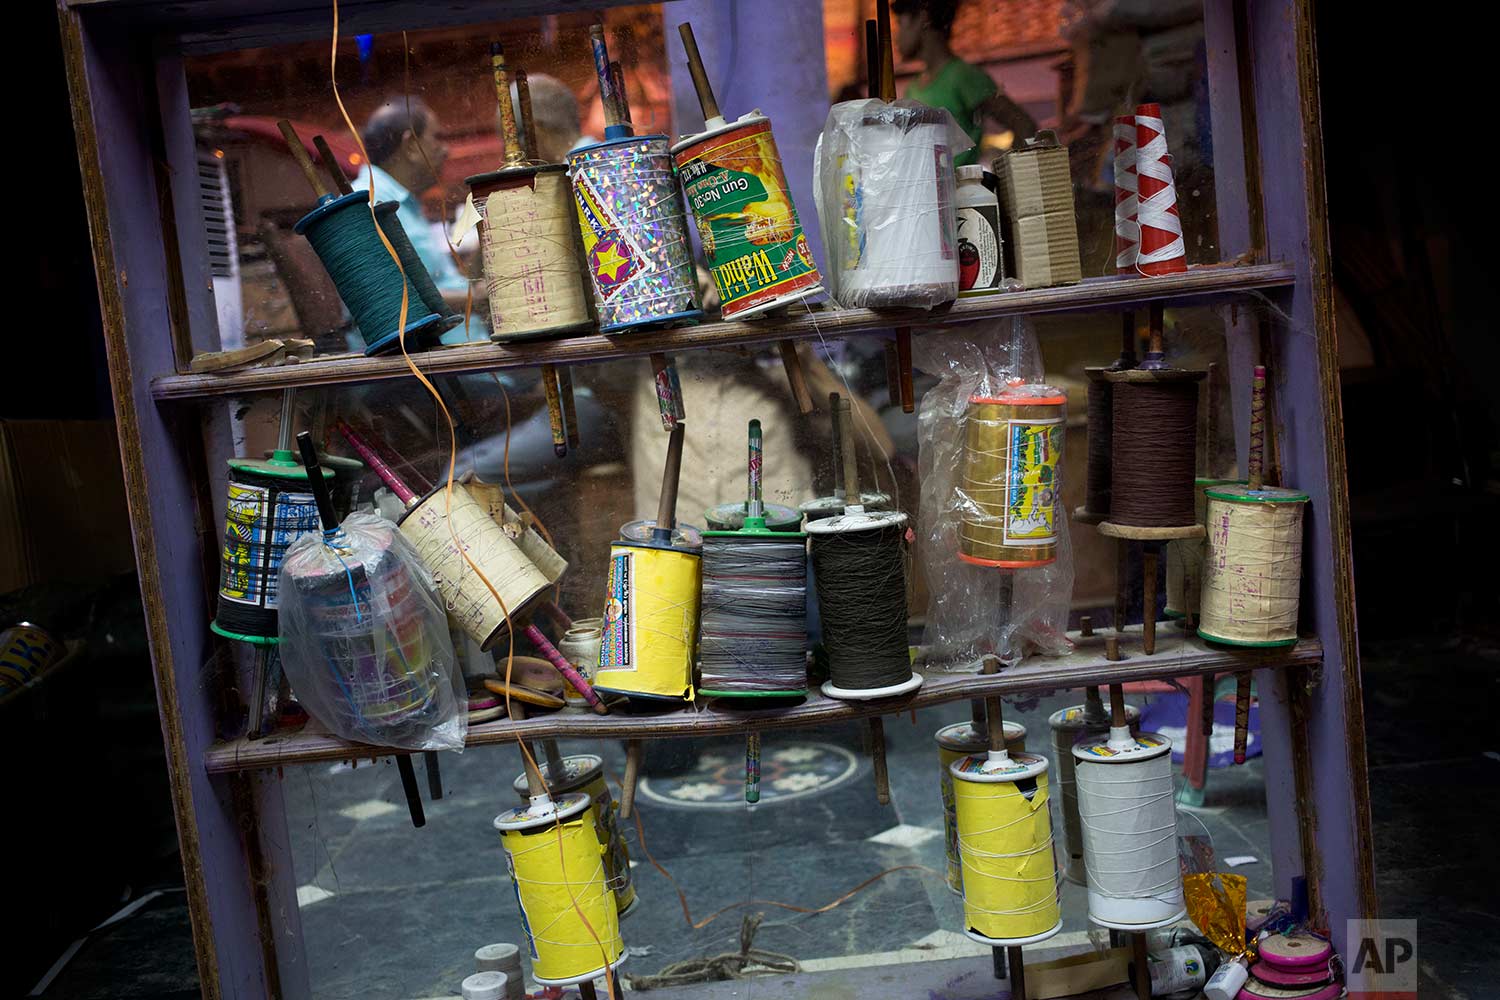  Rolls of kite strings are displayed for sale in the old quarters of New Delhi, India, Thursday, Aug. 17, 2017. (AP Photo/Tsering Topgyal) 